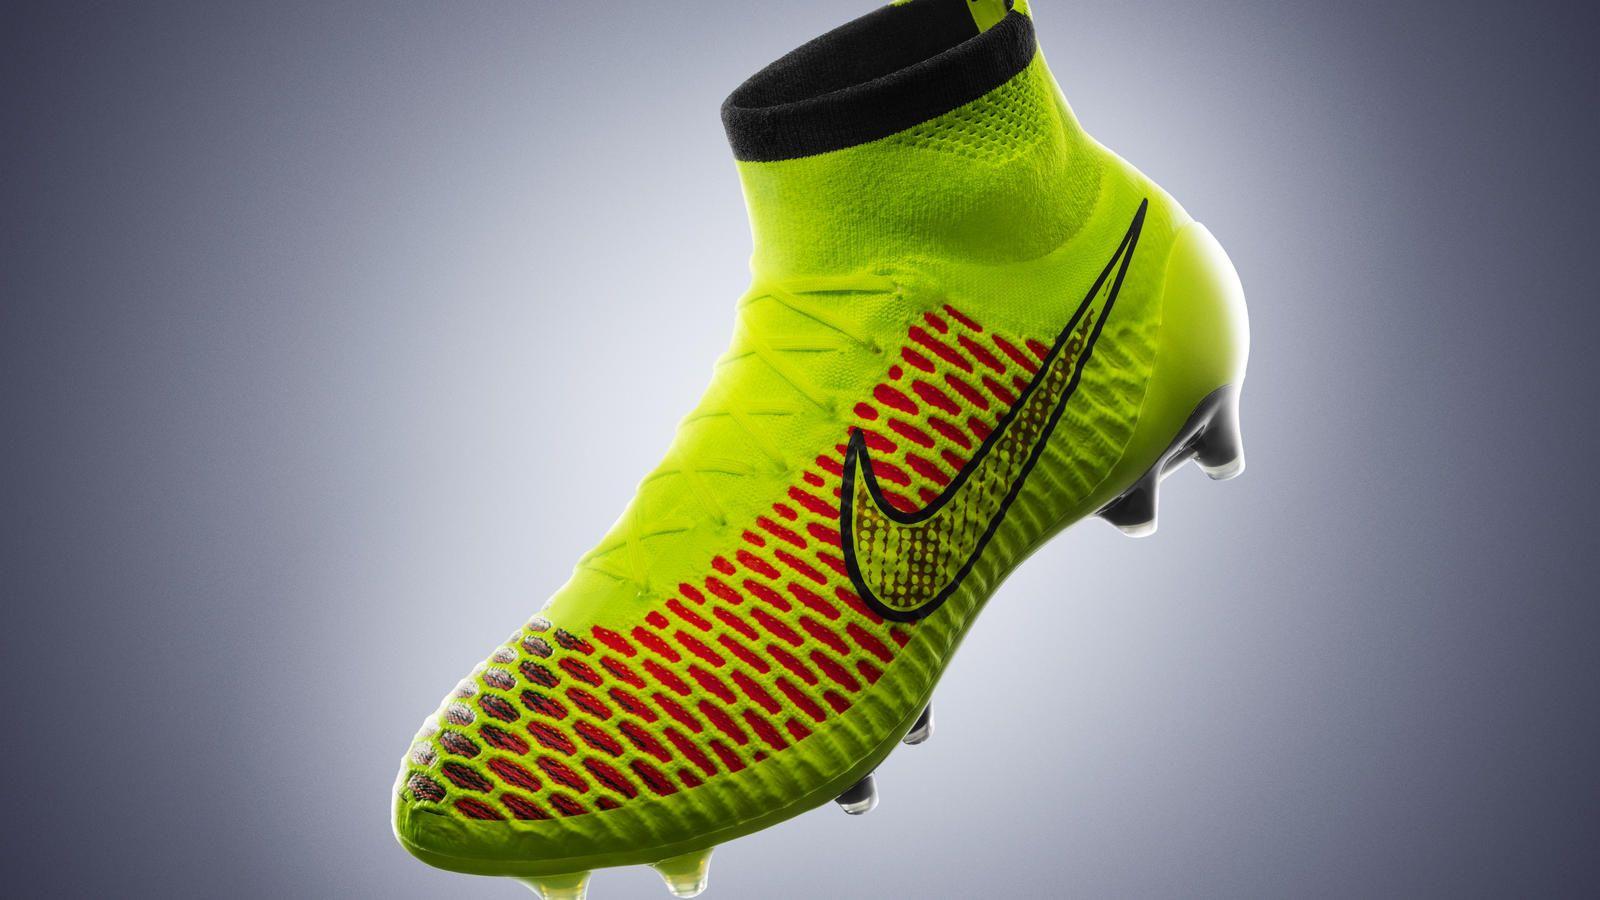 Nike Changes Football Boots Forever with New Magista